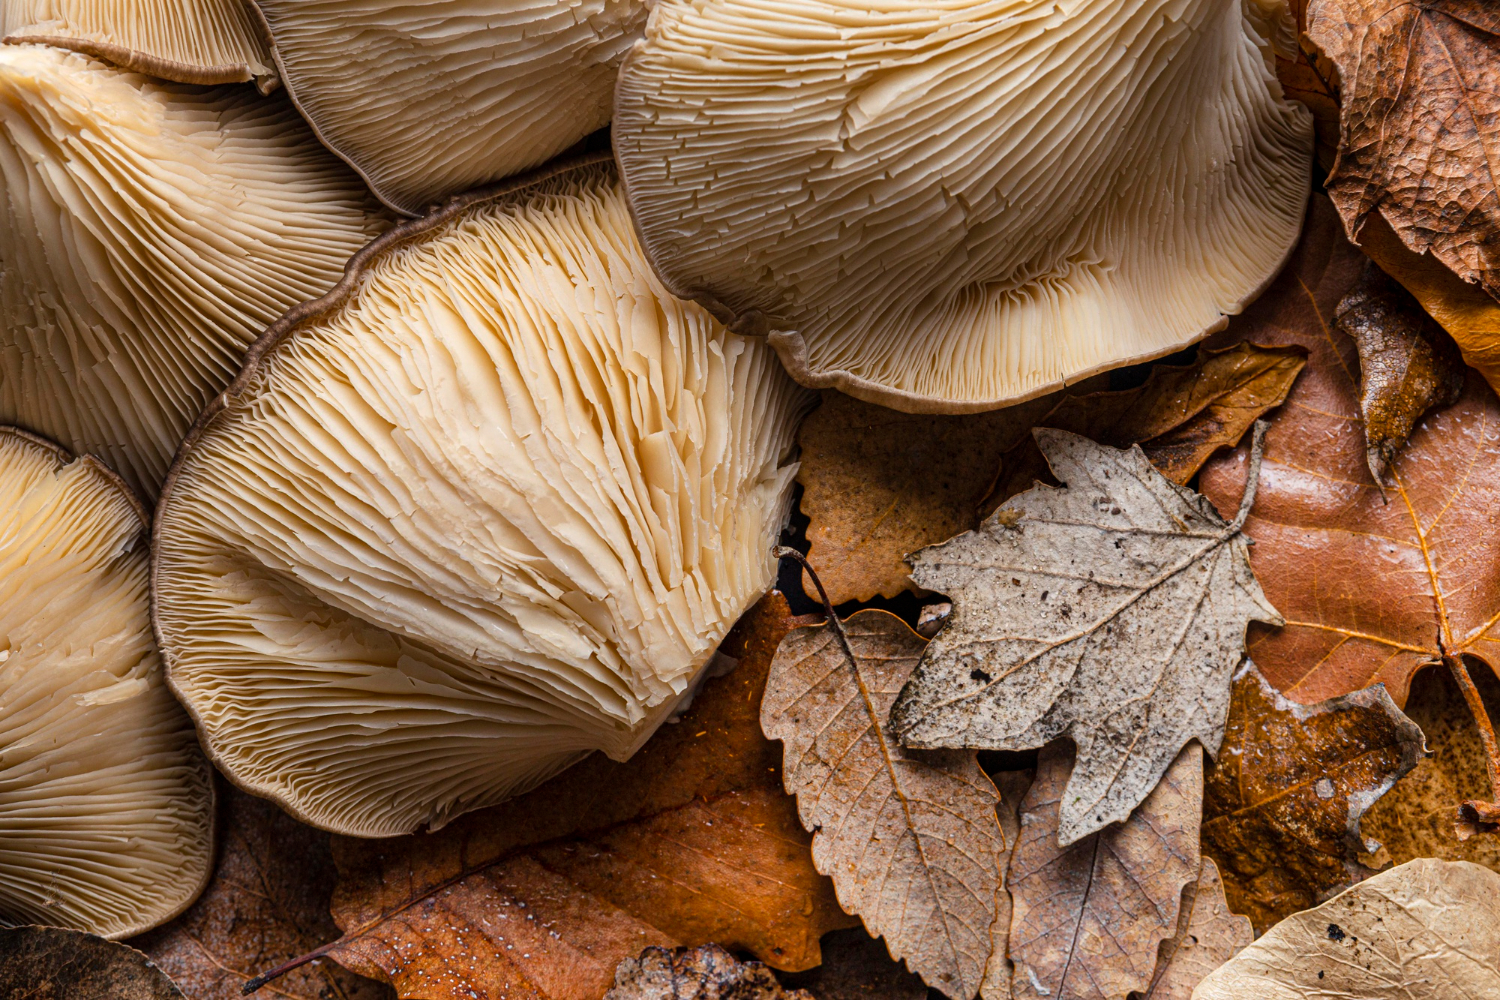 What are medicinal mushrooms and how can you use them?